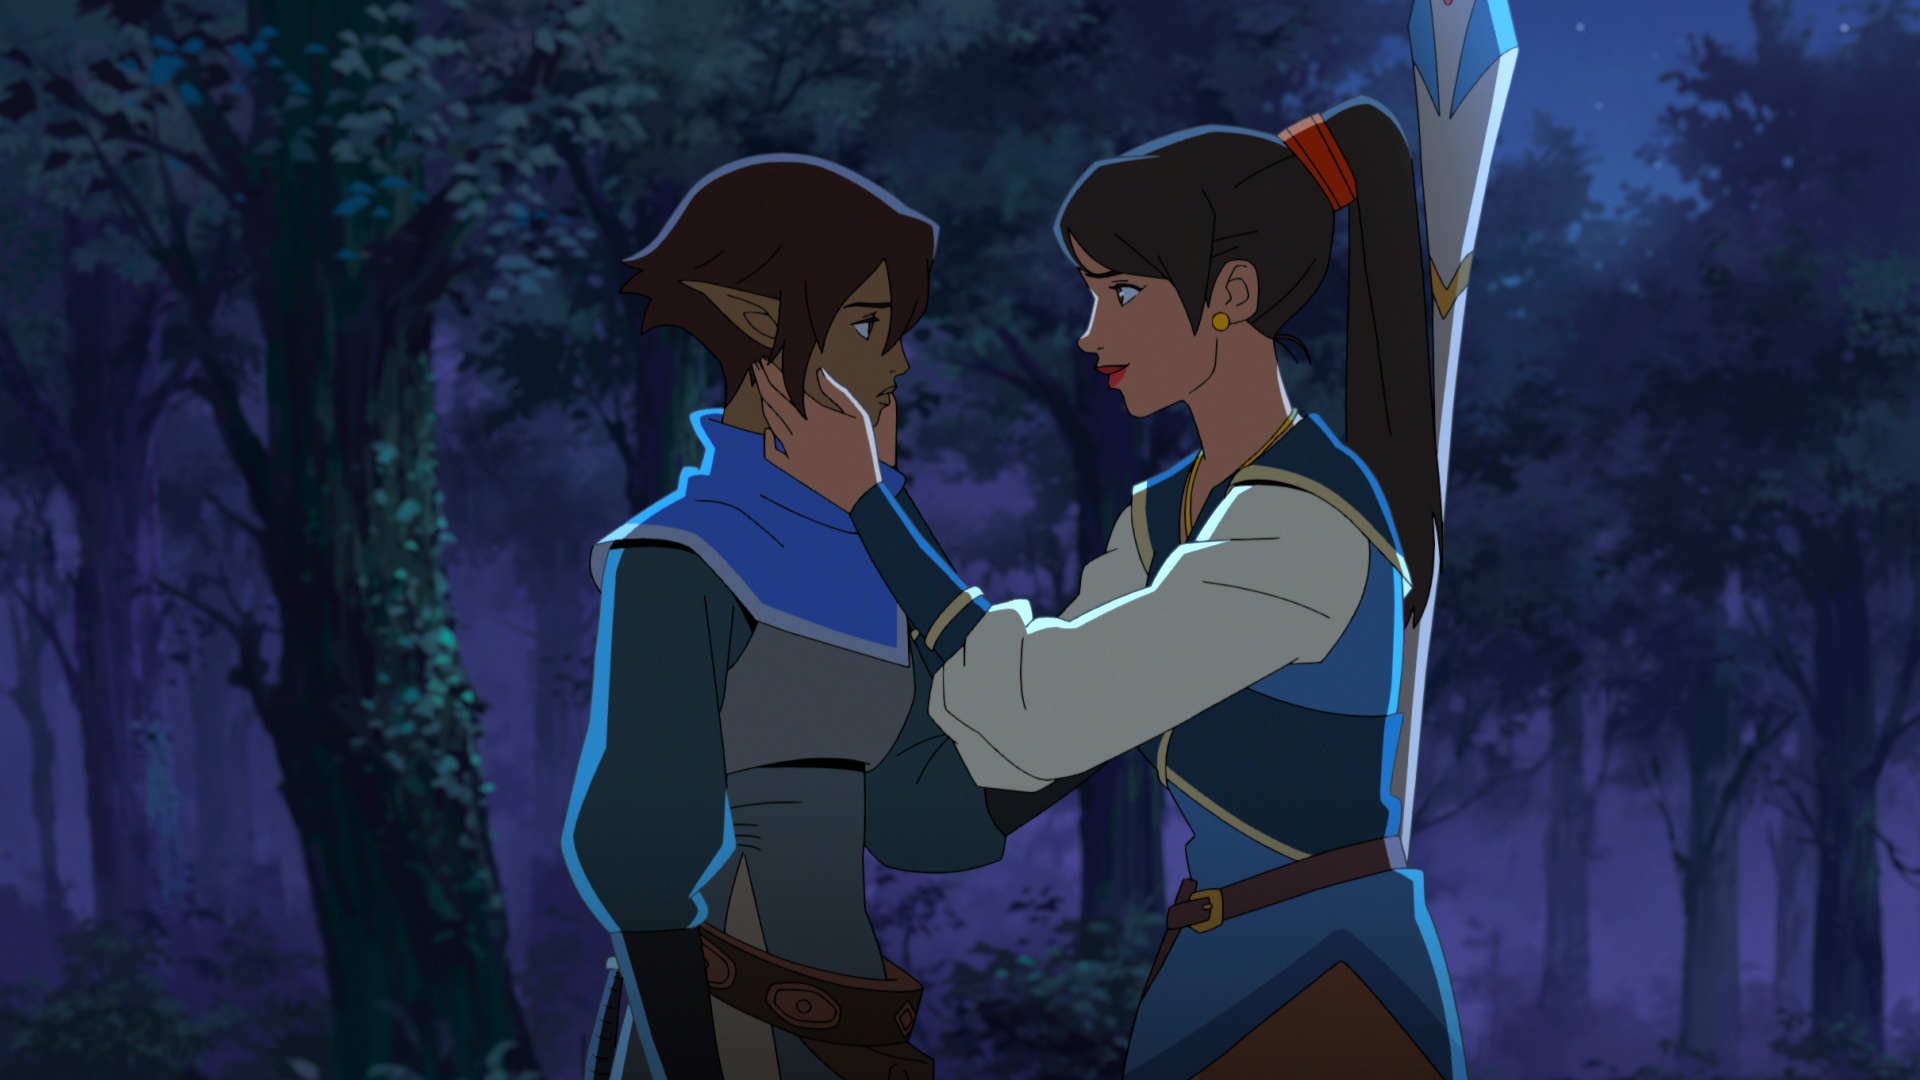 Dragon Age: Absolution - Hira and Miri share a moment together in a dark forest while Hira tenderly touches Miri's face.